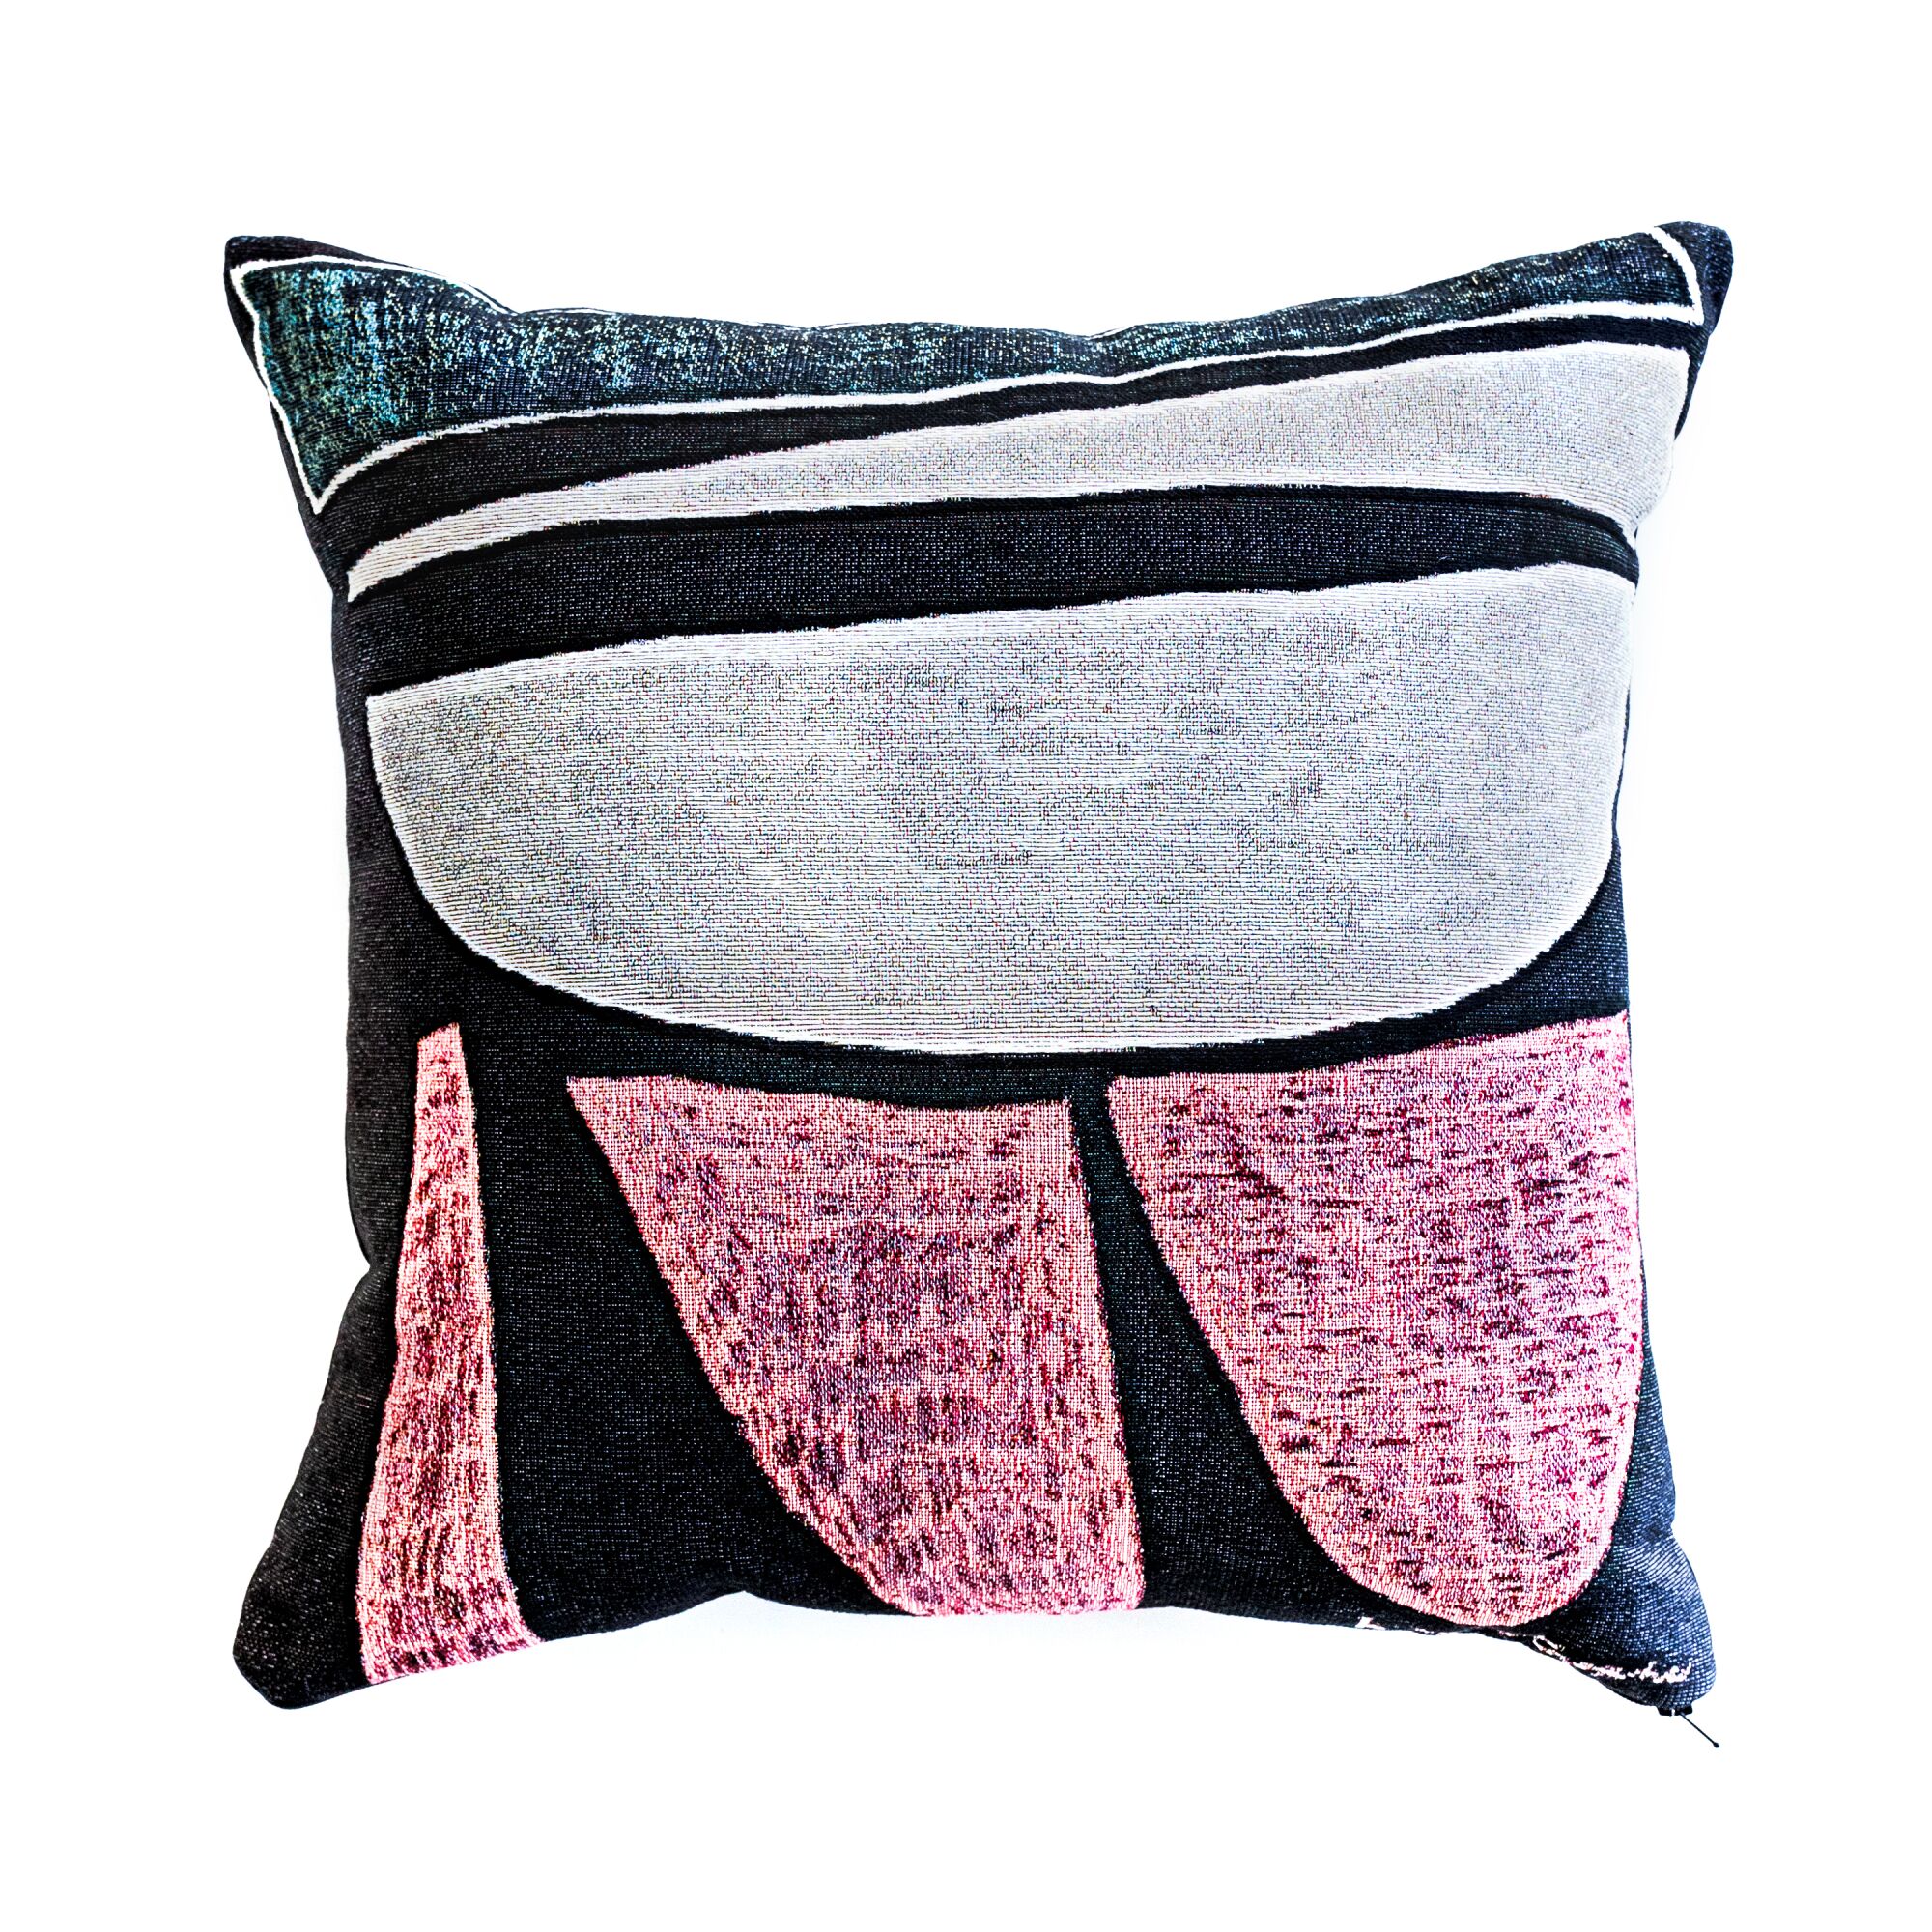 A throw pillow with an abstract design in pink, white and black